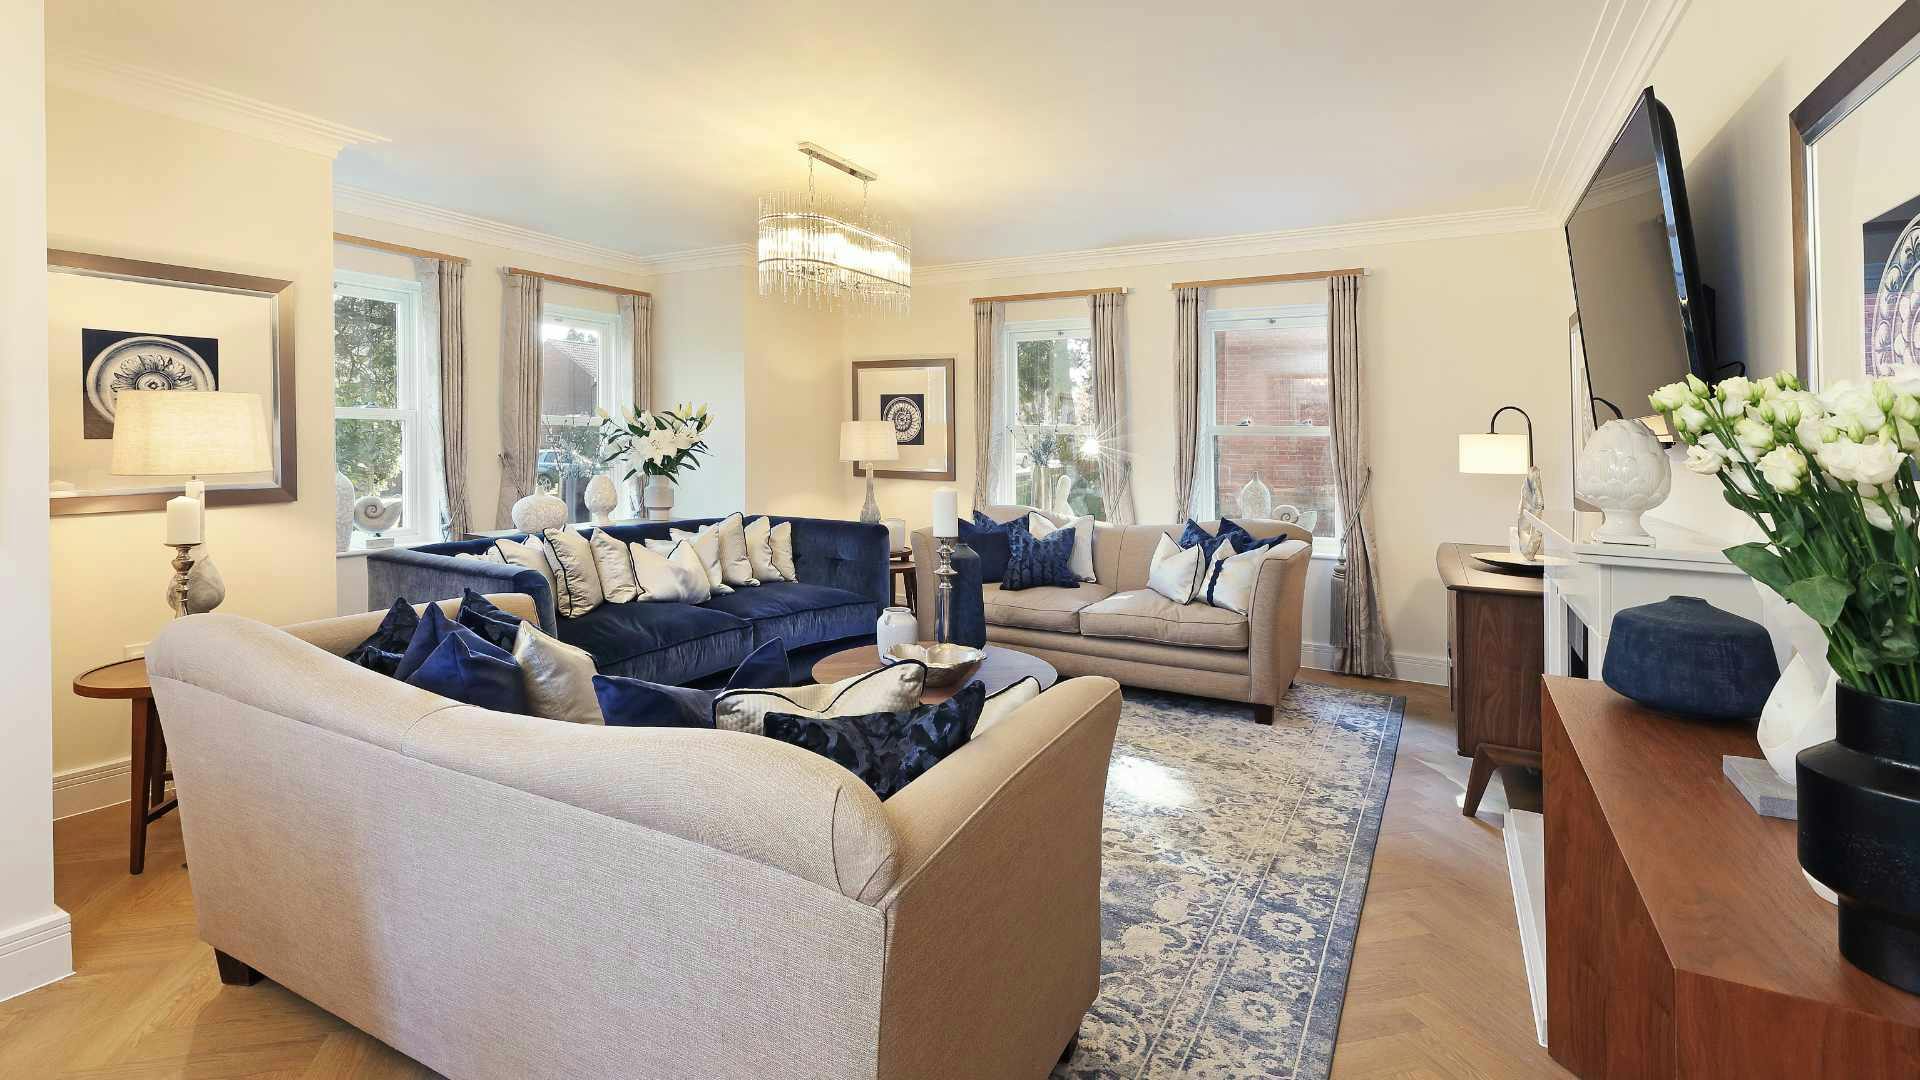 Lounge of Redclyffe Place retirement development in Harpenden, Hertfordshire